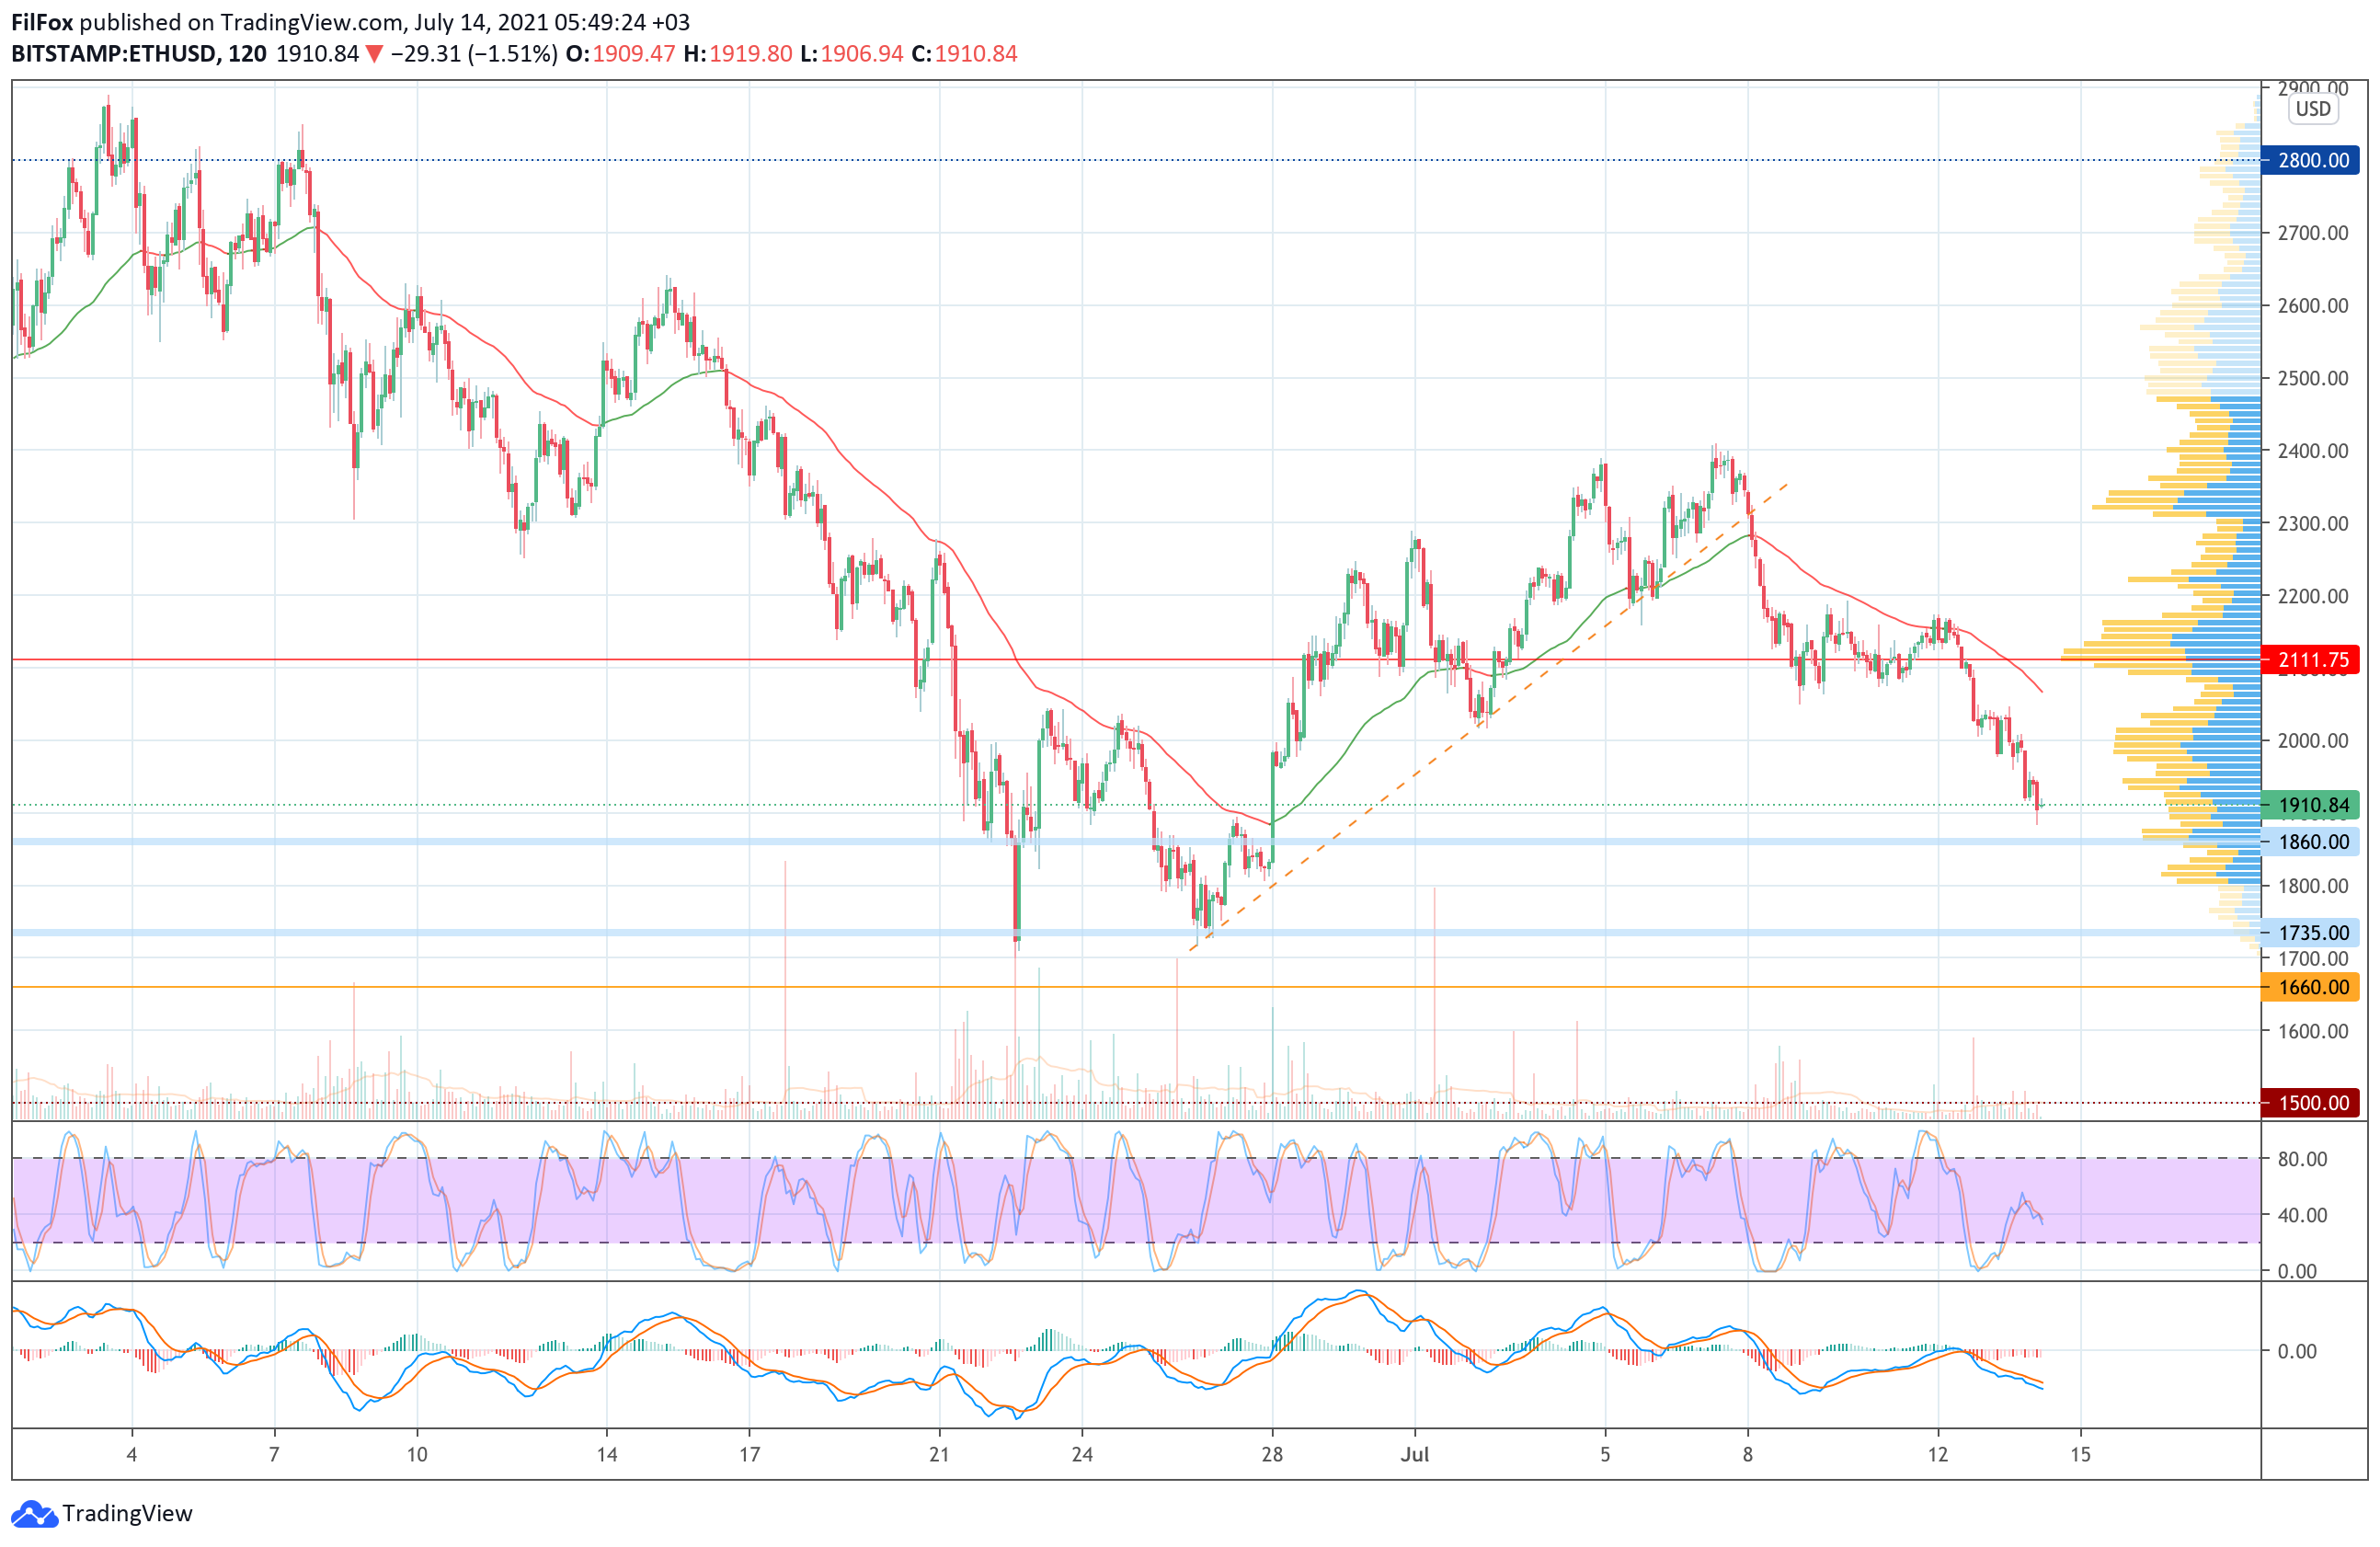 Analysis of the prices of Bitcoin, Ethereum, XRP for 07/14/2021